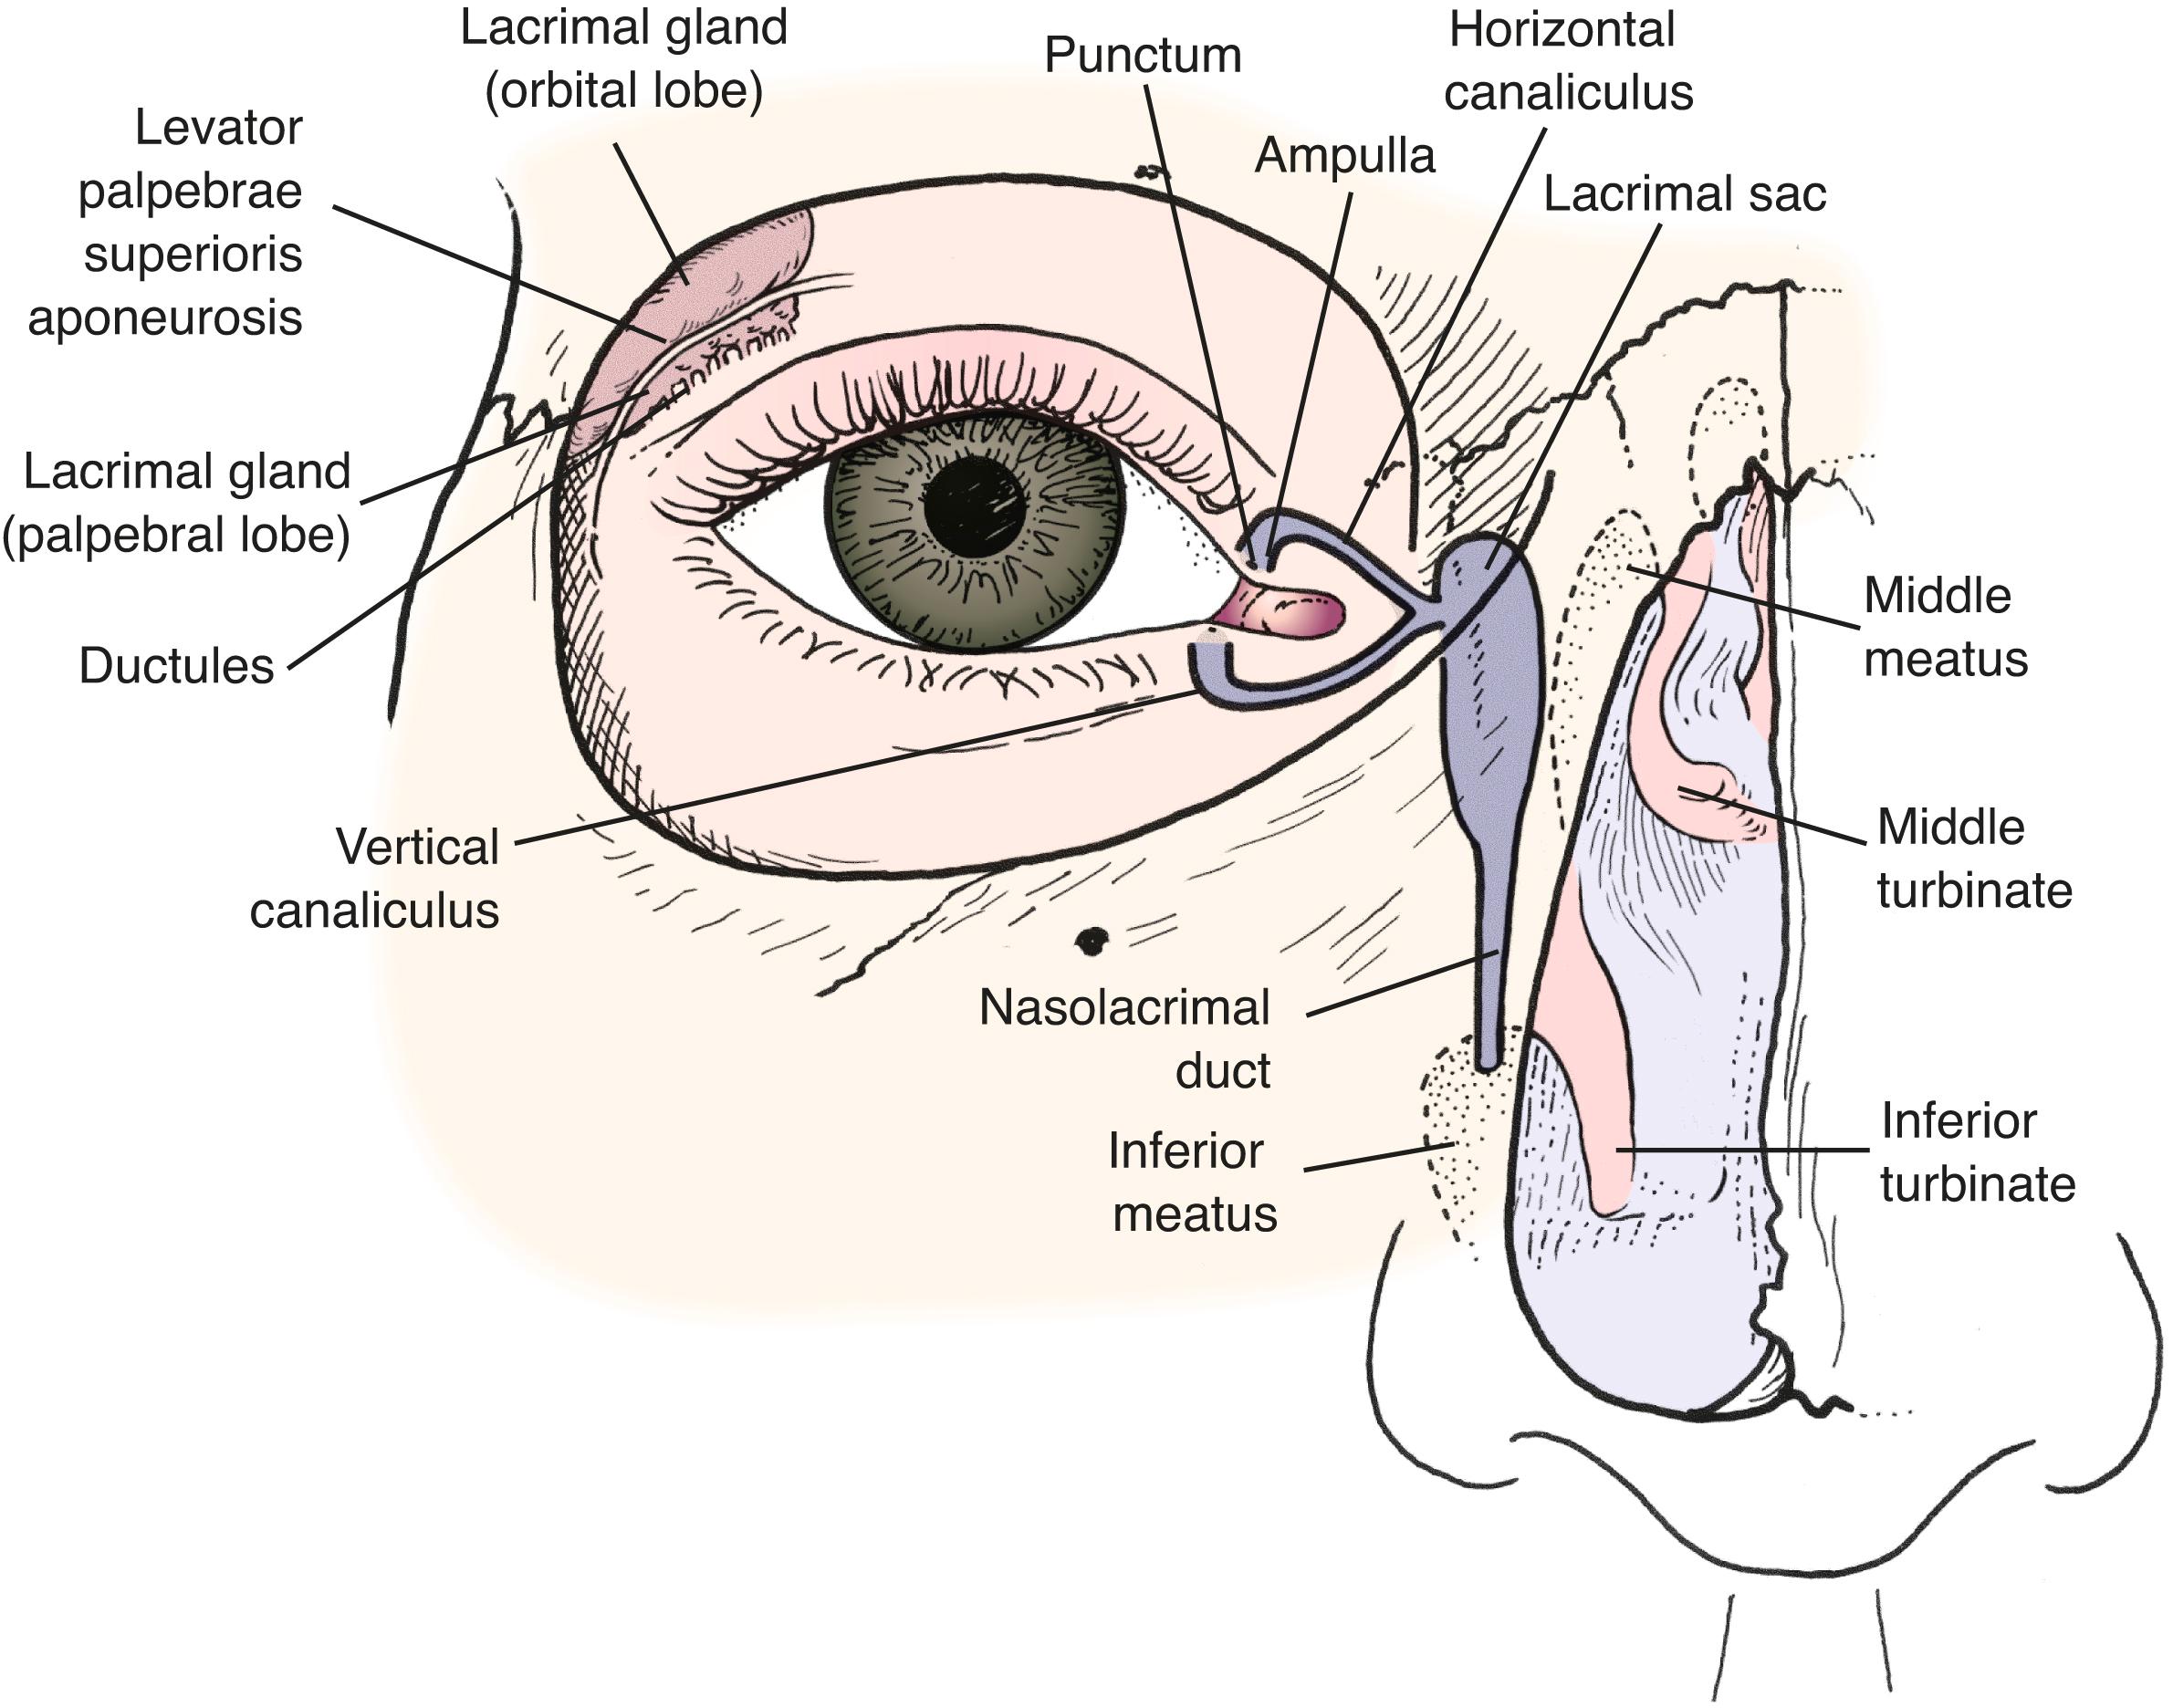 Figure 10.2, The anatomy of the lacrimal system.